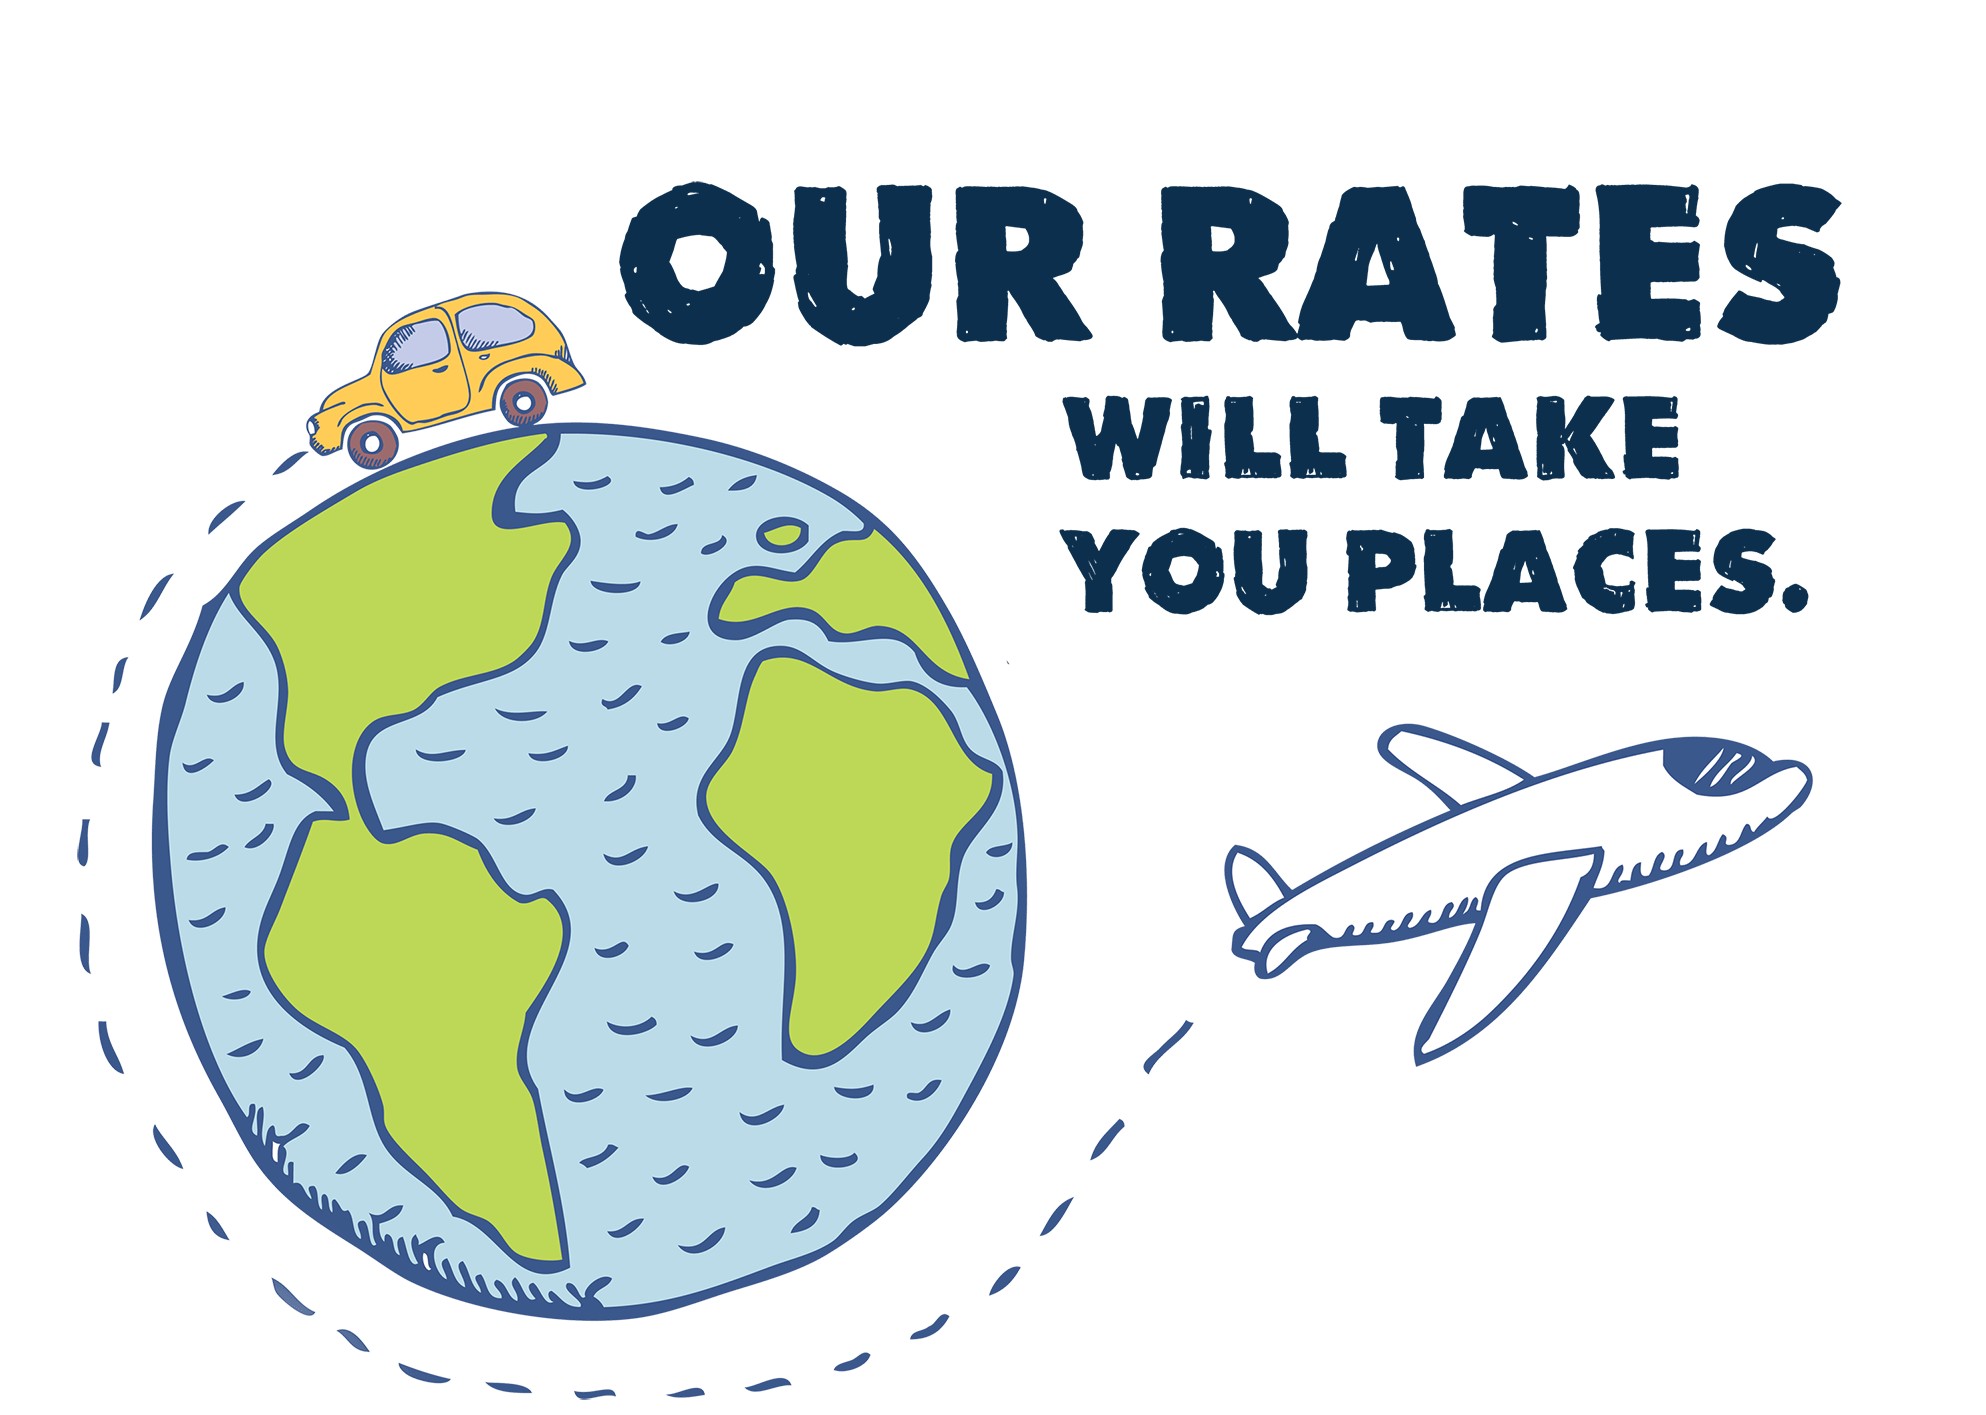 Our rates will take you places.